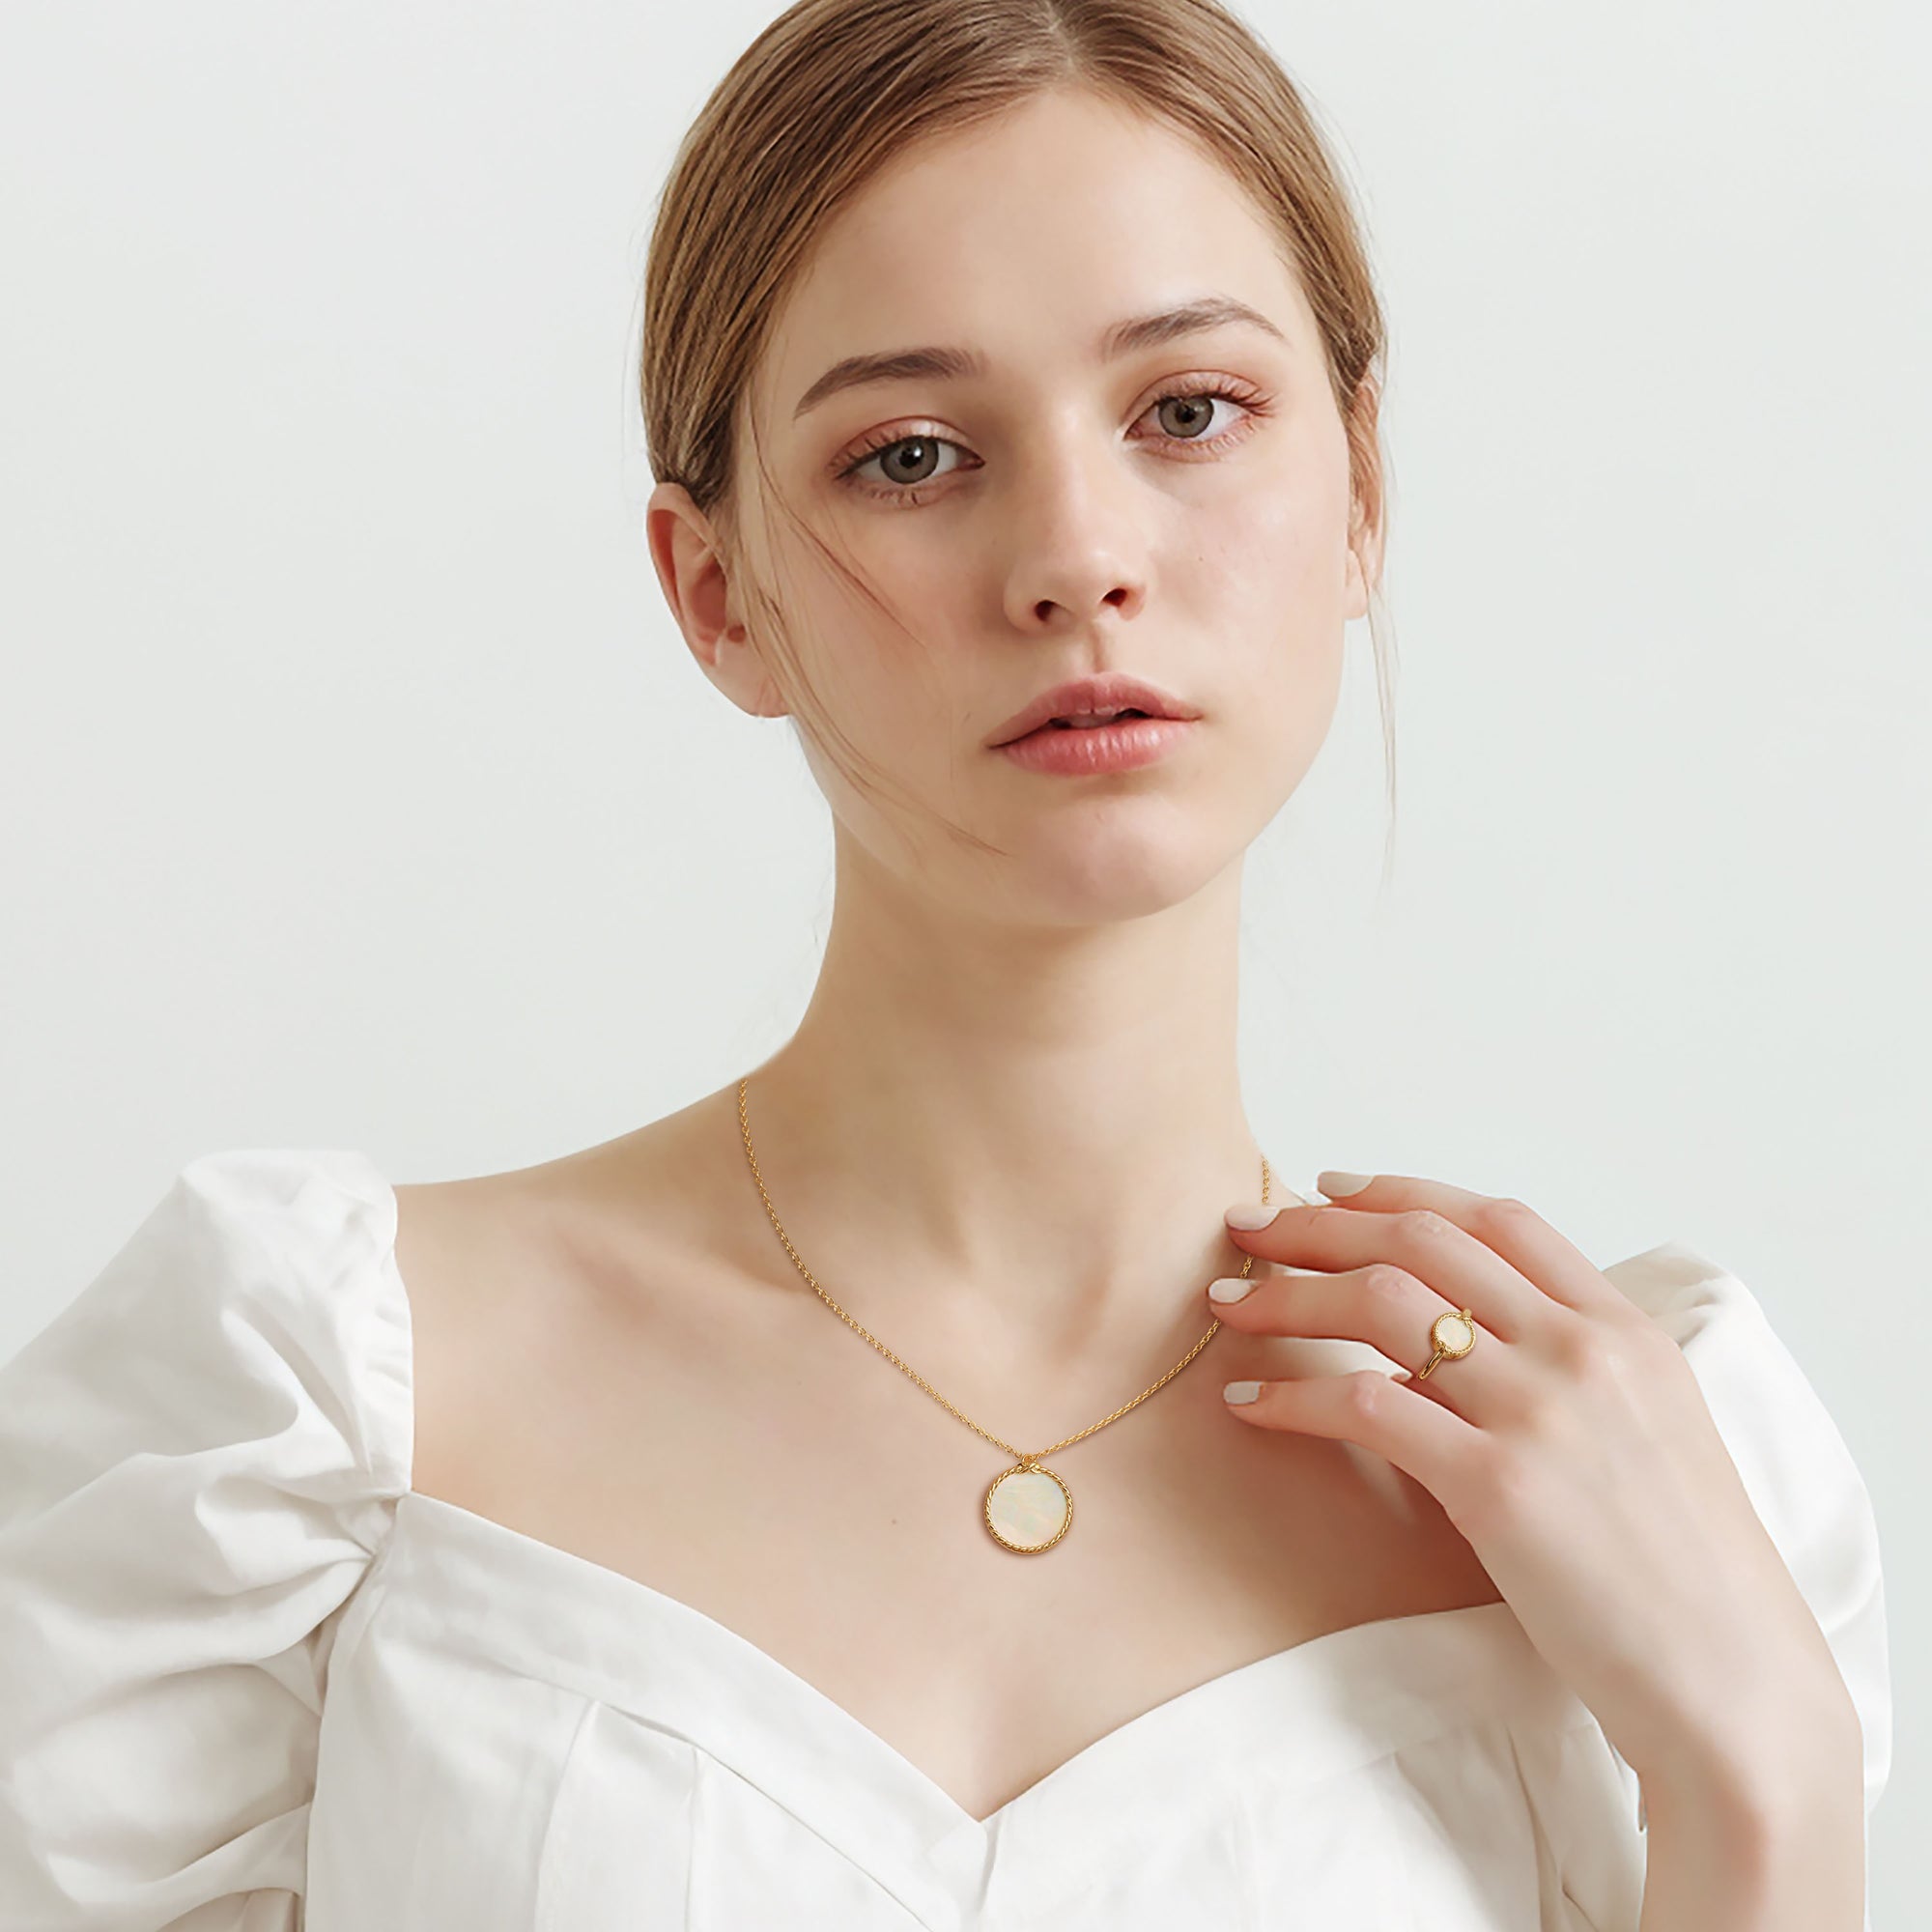 Mother of Pearl Disc Necklace - vanimy